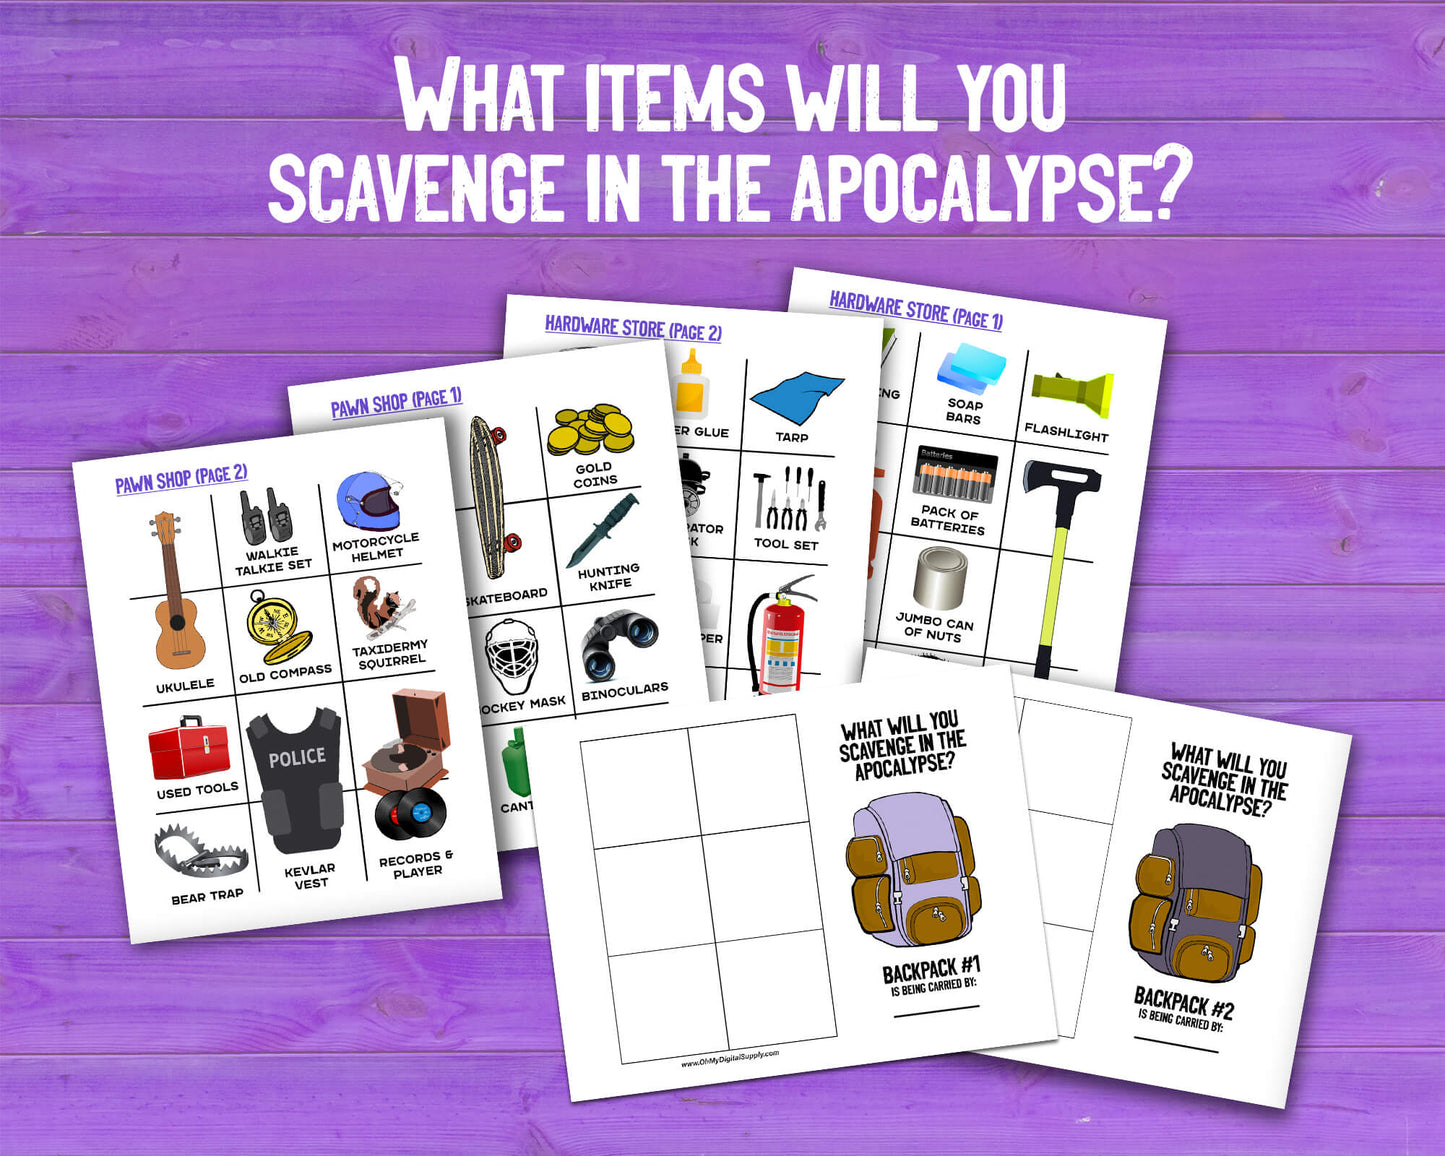 Decision Quest Bundle #1 with Desert Island, Fallout Shelter, Space Mission, and Zombie Apocalypse, Printable Team Building Activities